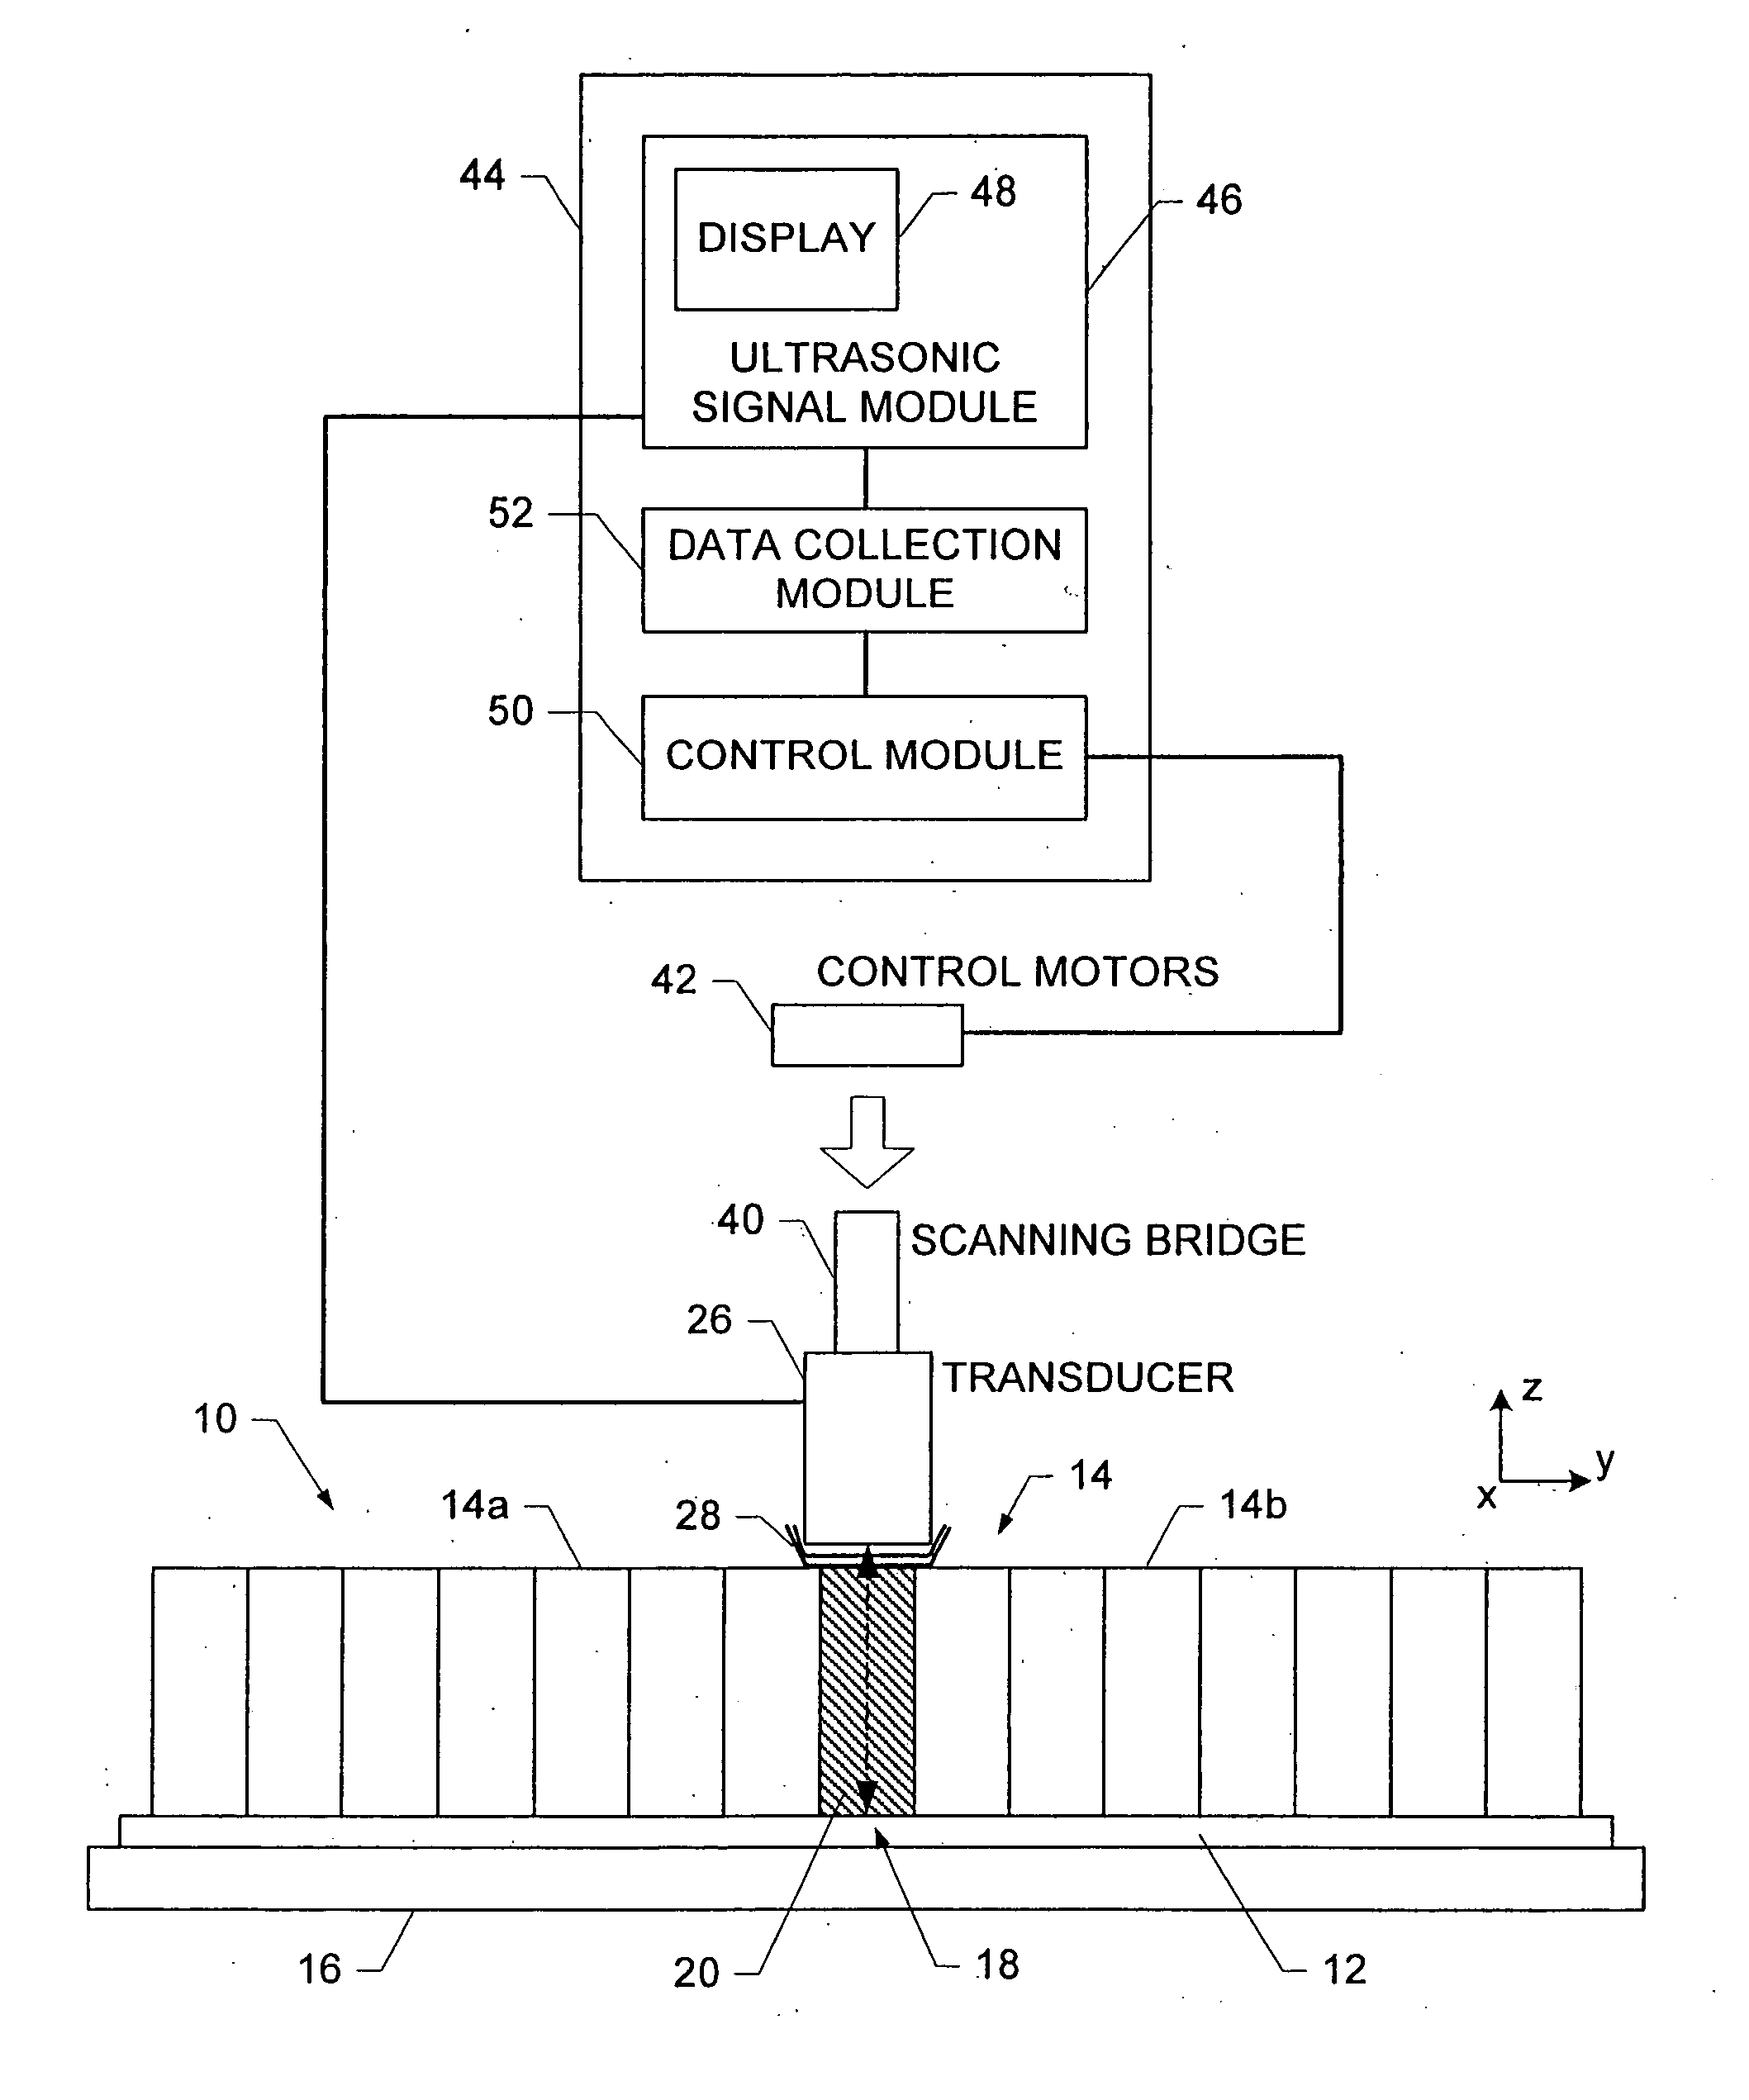 System and method for identifying incompletely cured adhesive